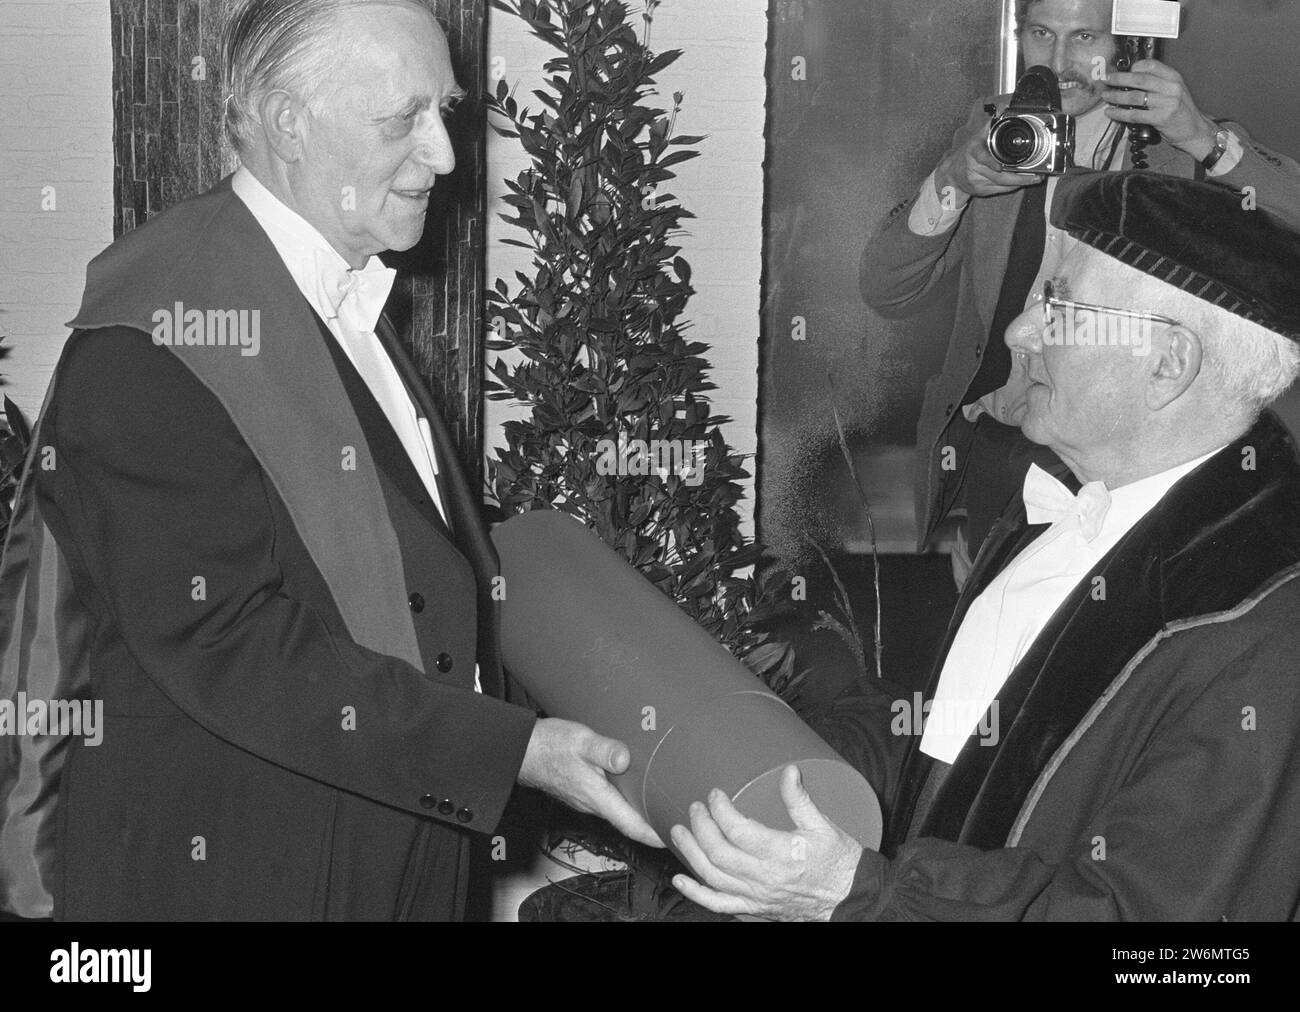 Honorary doctorate for H. J. Krauweel , director of the Jellinek clinic in Amsterdam, Prof. Dr. A. Querido (r) hands over the diploma to Mr. Krauweel / ca. January 8, 1973 Stock Photo